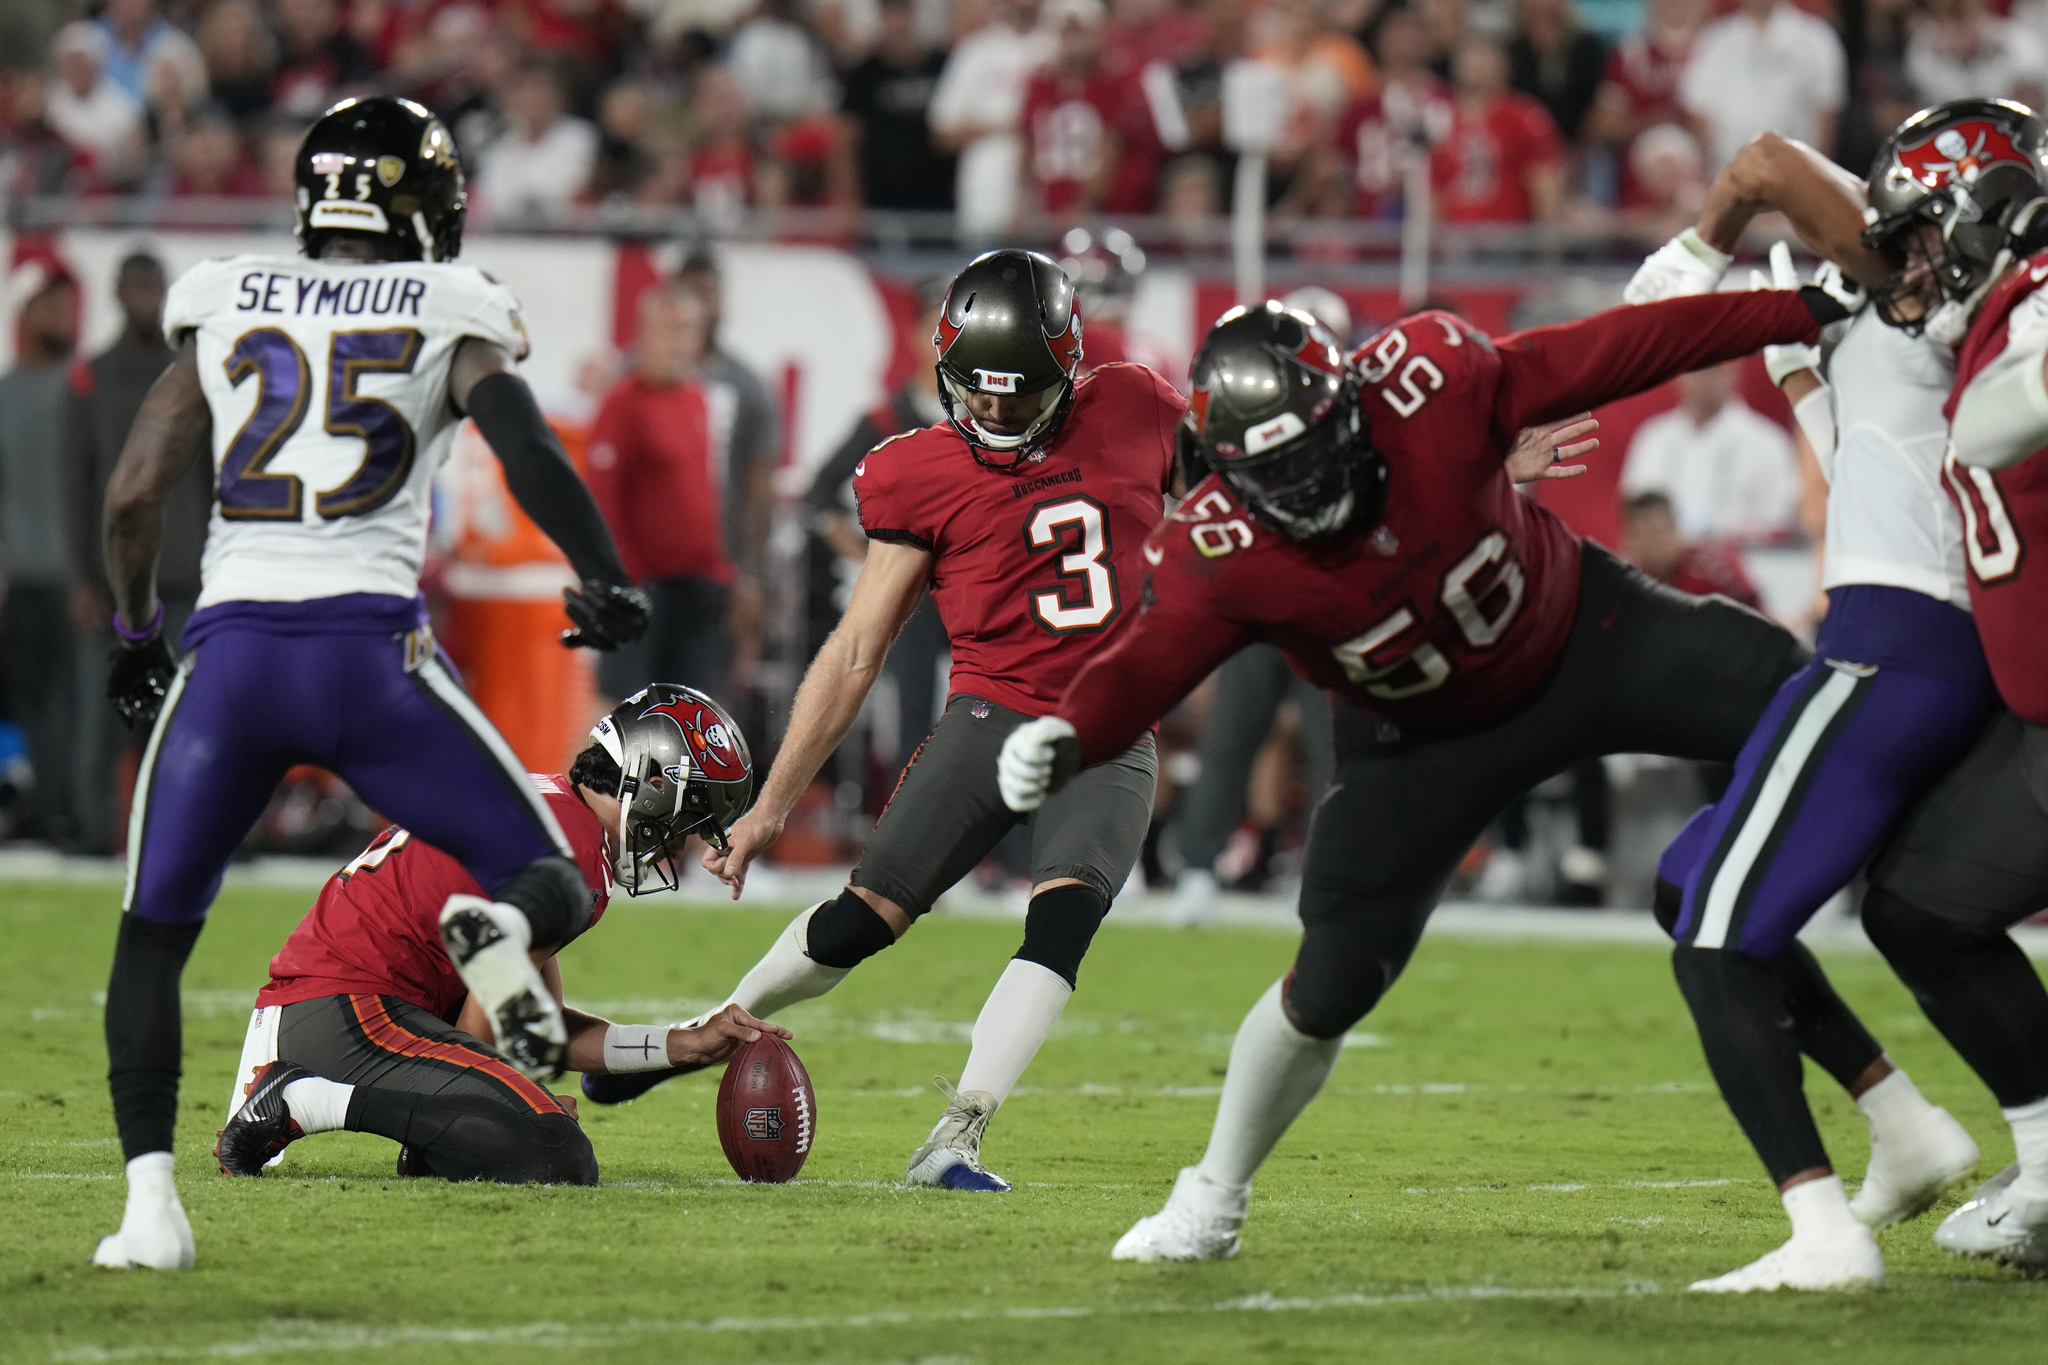 Tampa Bay Buccaneers place kicker makes a 30-yard field goal against Baltimore Ravens.